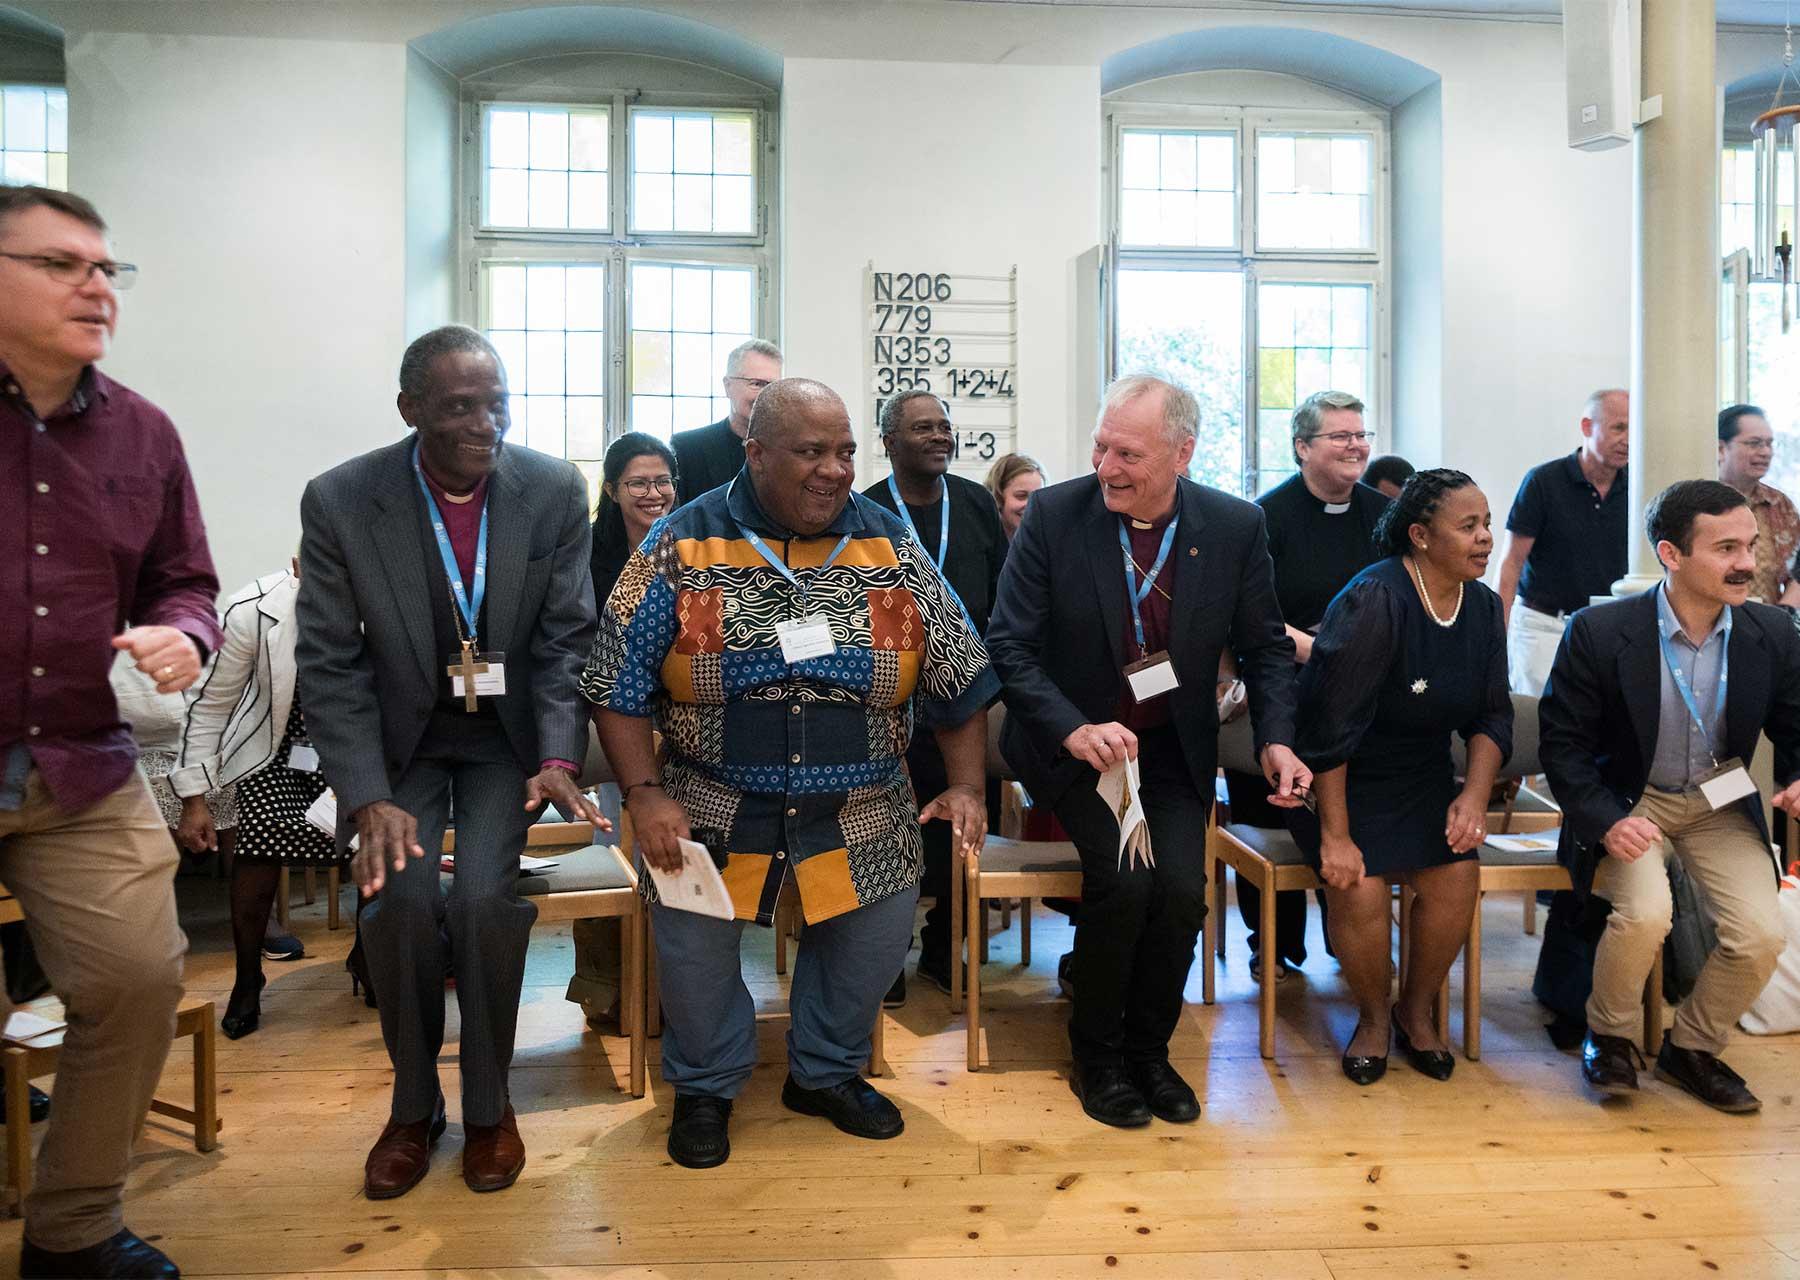 LWF President Bishop Henrik Stubkjær and other Council members join in singing and dancing during vibrant Sunday worship at the Evangelical Lutheran Church of Geneva. Photo: LWF/A. Hillert 